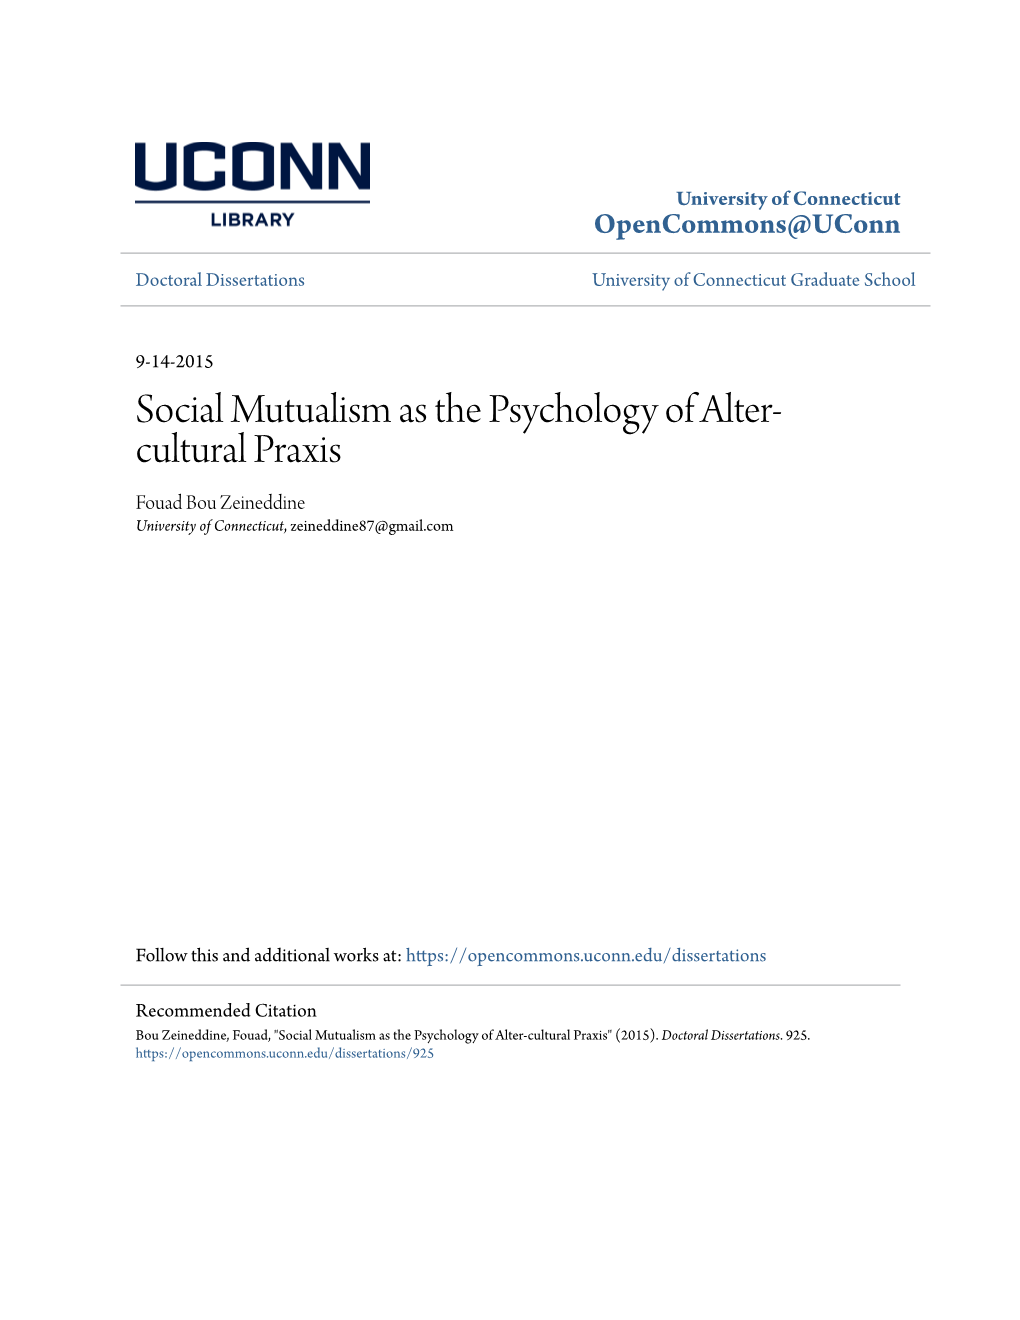 Social Mutualism As the Psychology of Alter-Cultural Praxis" (2015)